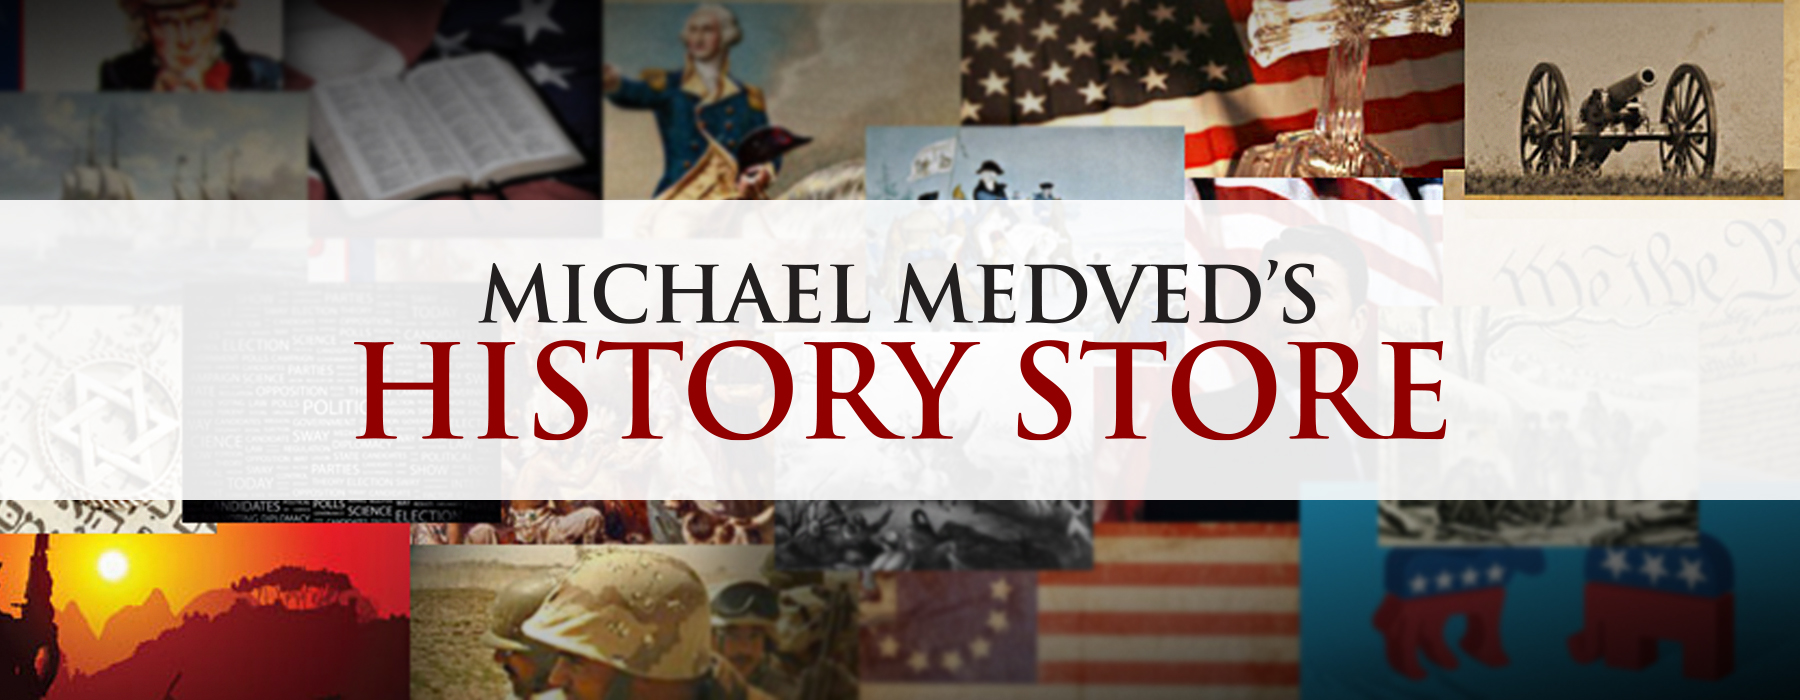 Michael medved history store